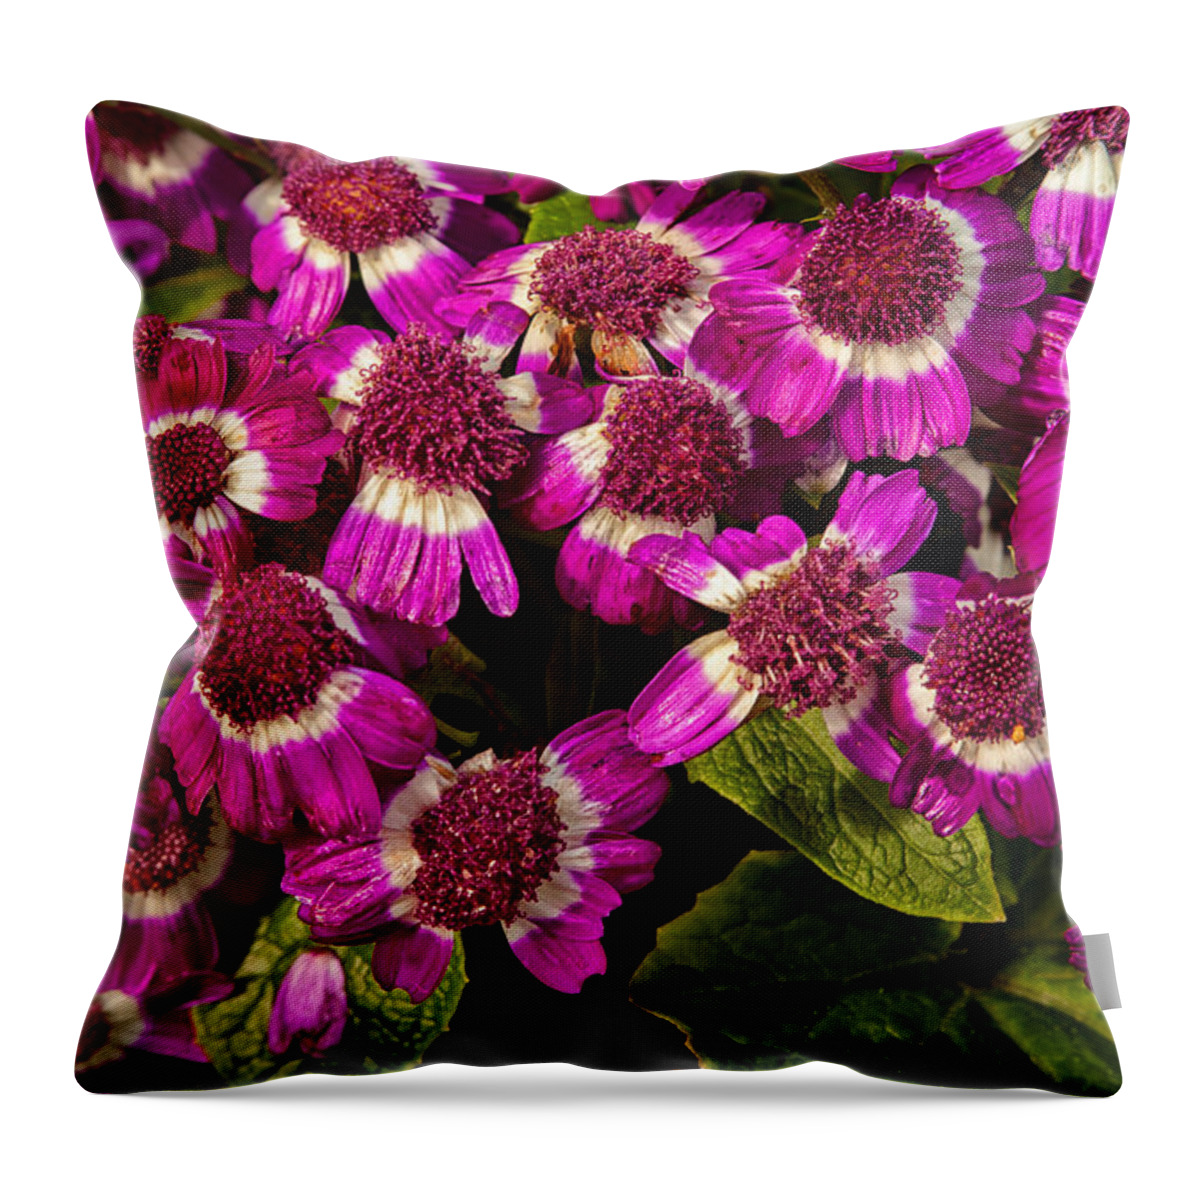 Flowers Throw Pillow featuring the photograph Petals After a Shower by Karol Livote